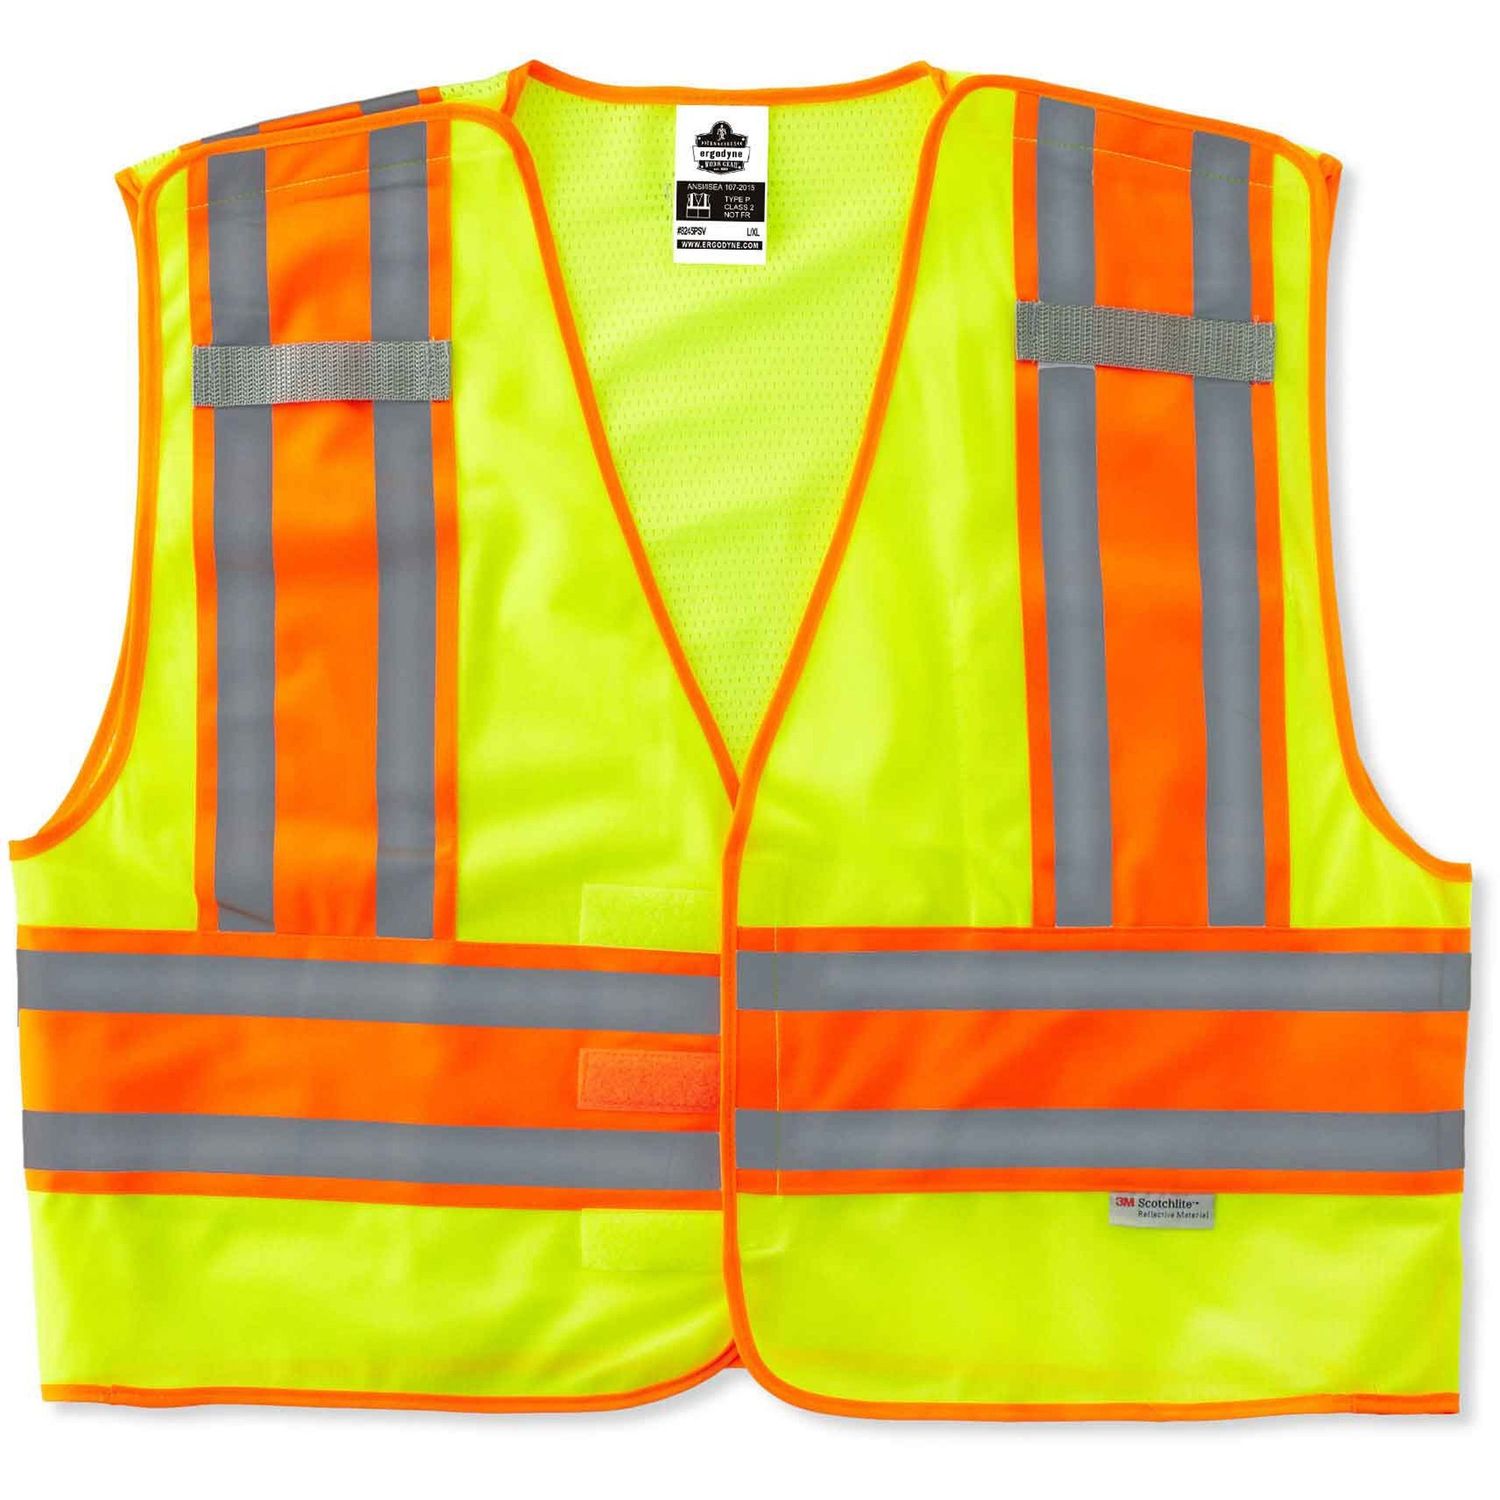 8245PSV Type P Class 2 Public Safety Vest Reflective, Pocket, Mic Tab, Two-tone, Large/Extra Large Size, Hook & Loop Closure, Mesh Back, Poly, Lime, 1 Piece